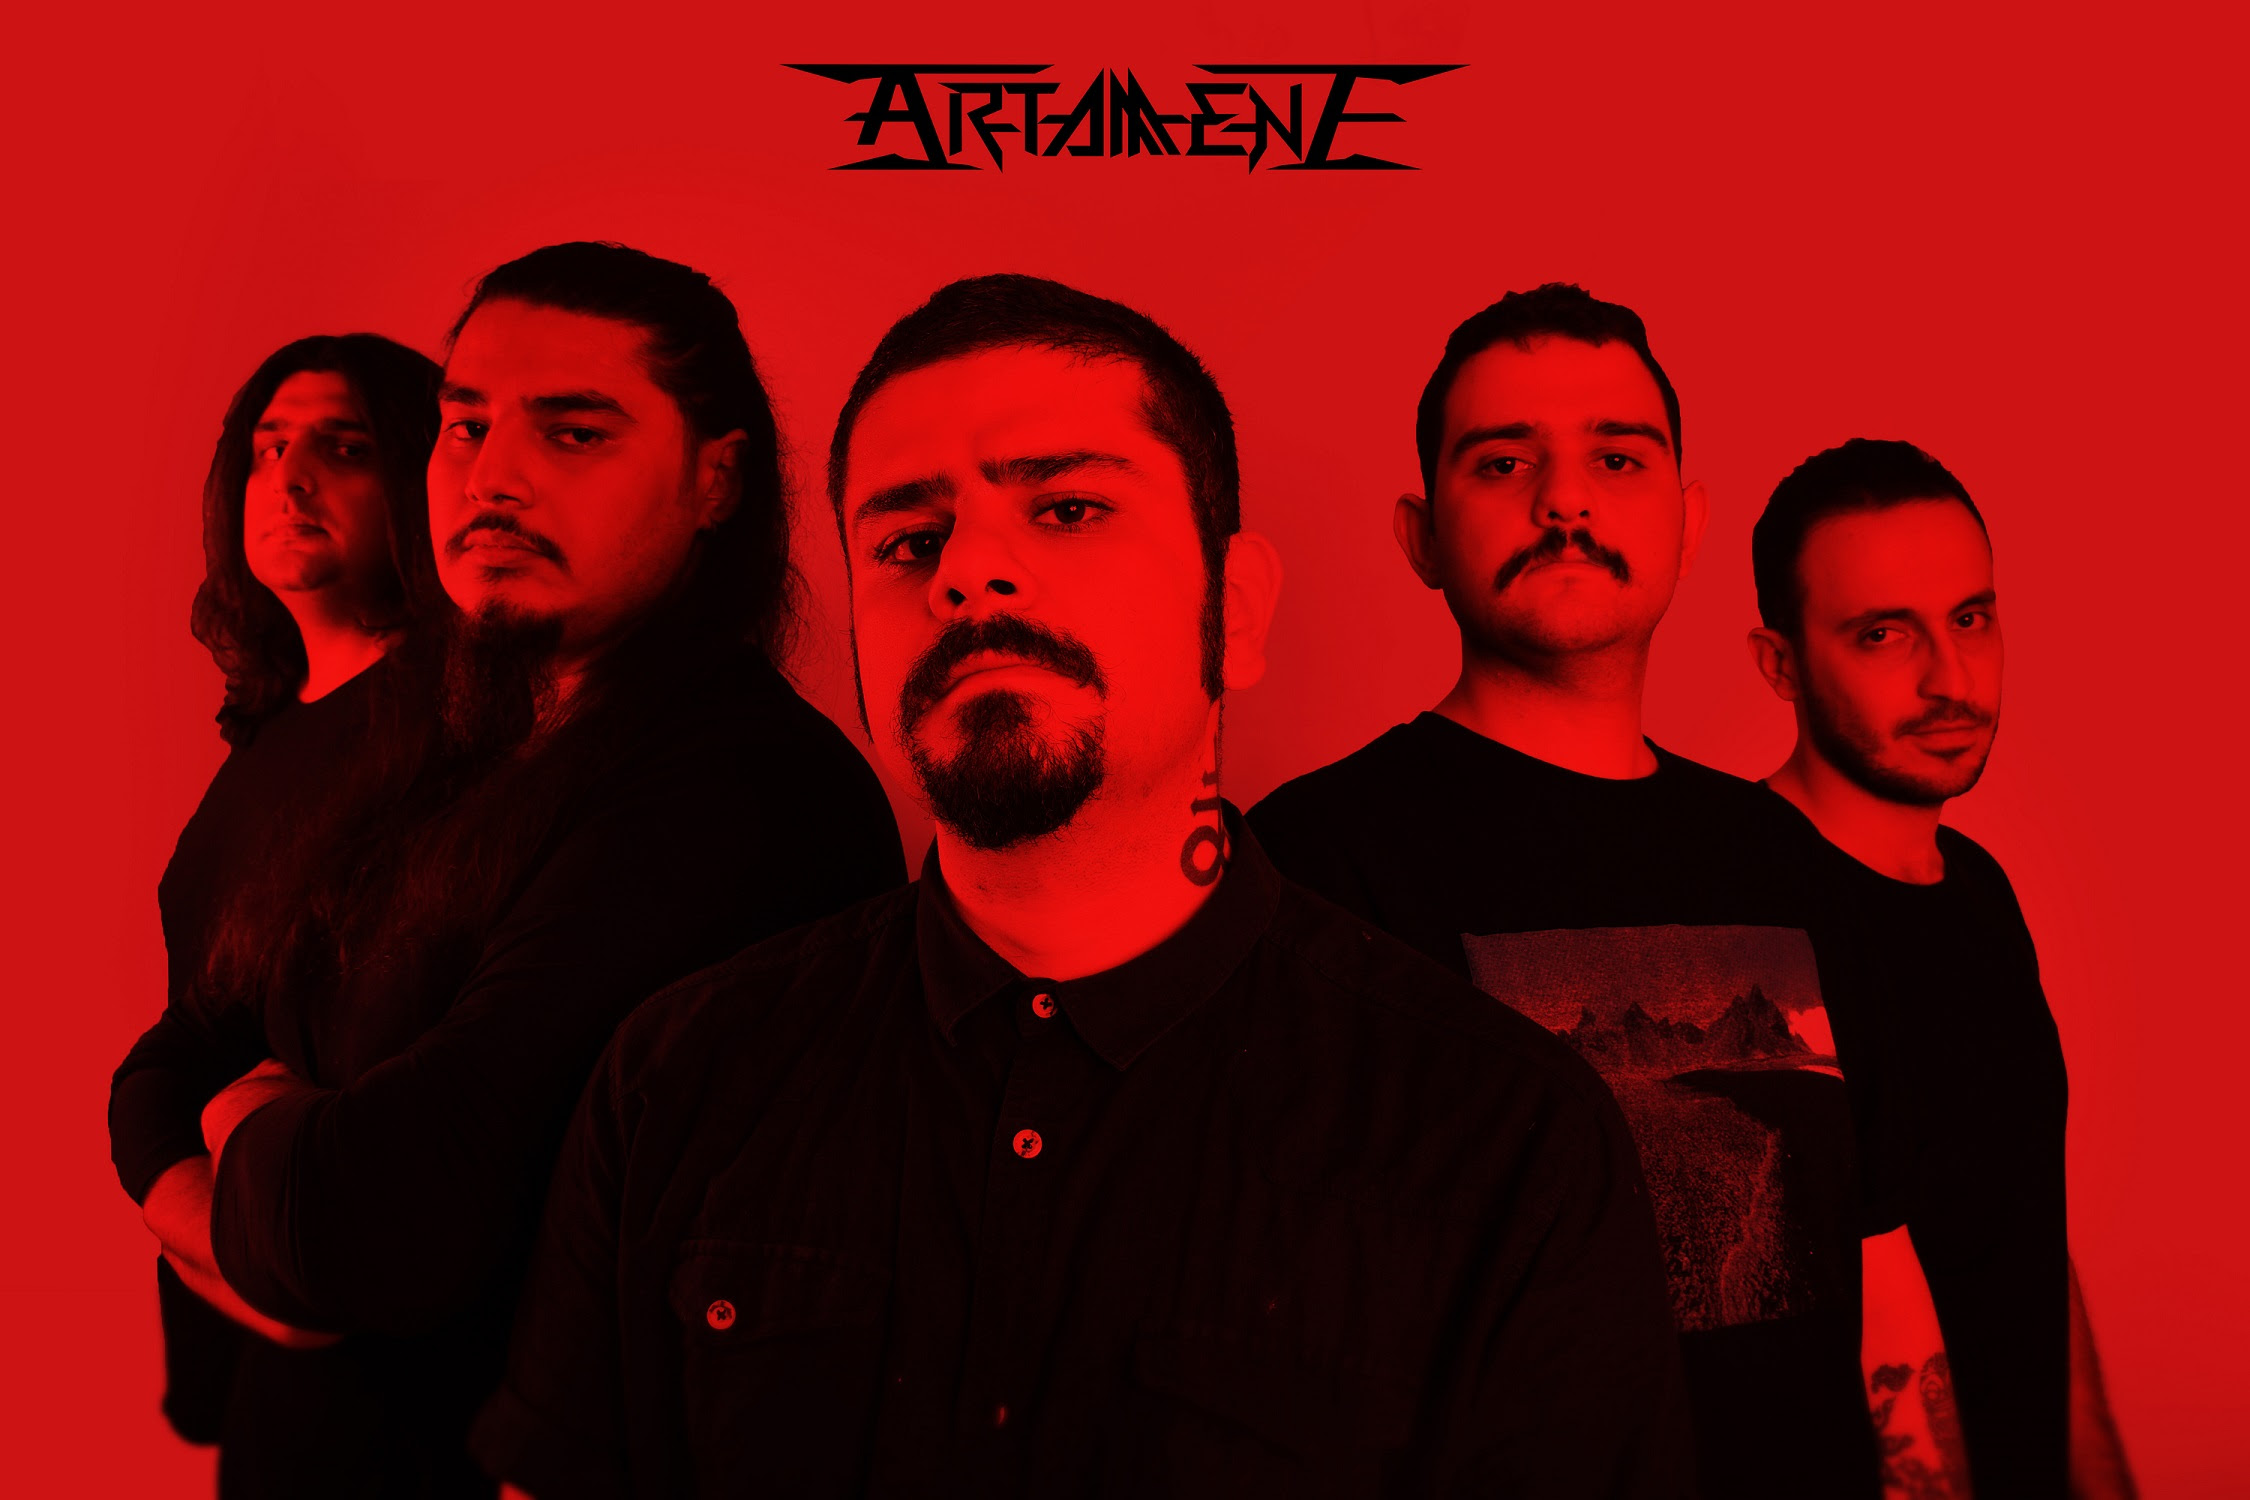 You are currently viewing ARTAMENE: The band from Iran announces the release of the new album “Ziggurat” and signs to WormholeDeath Records.